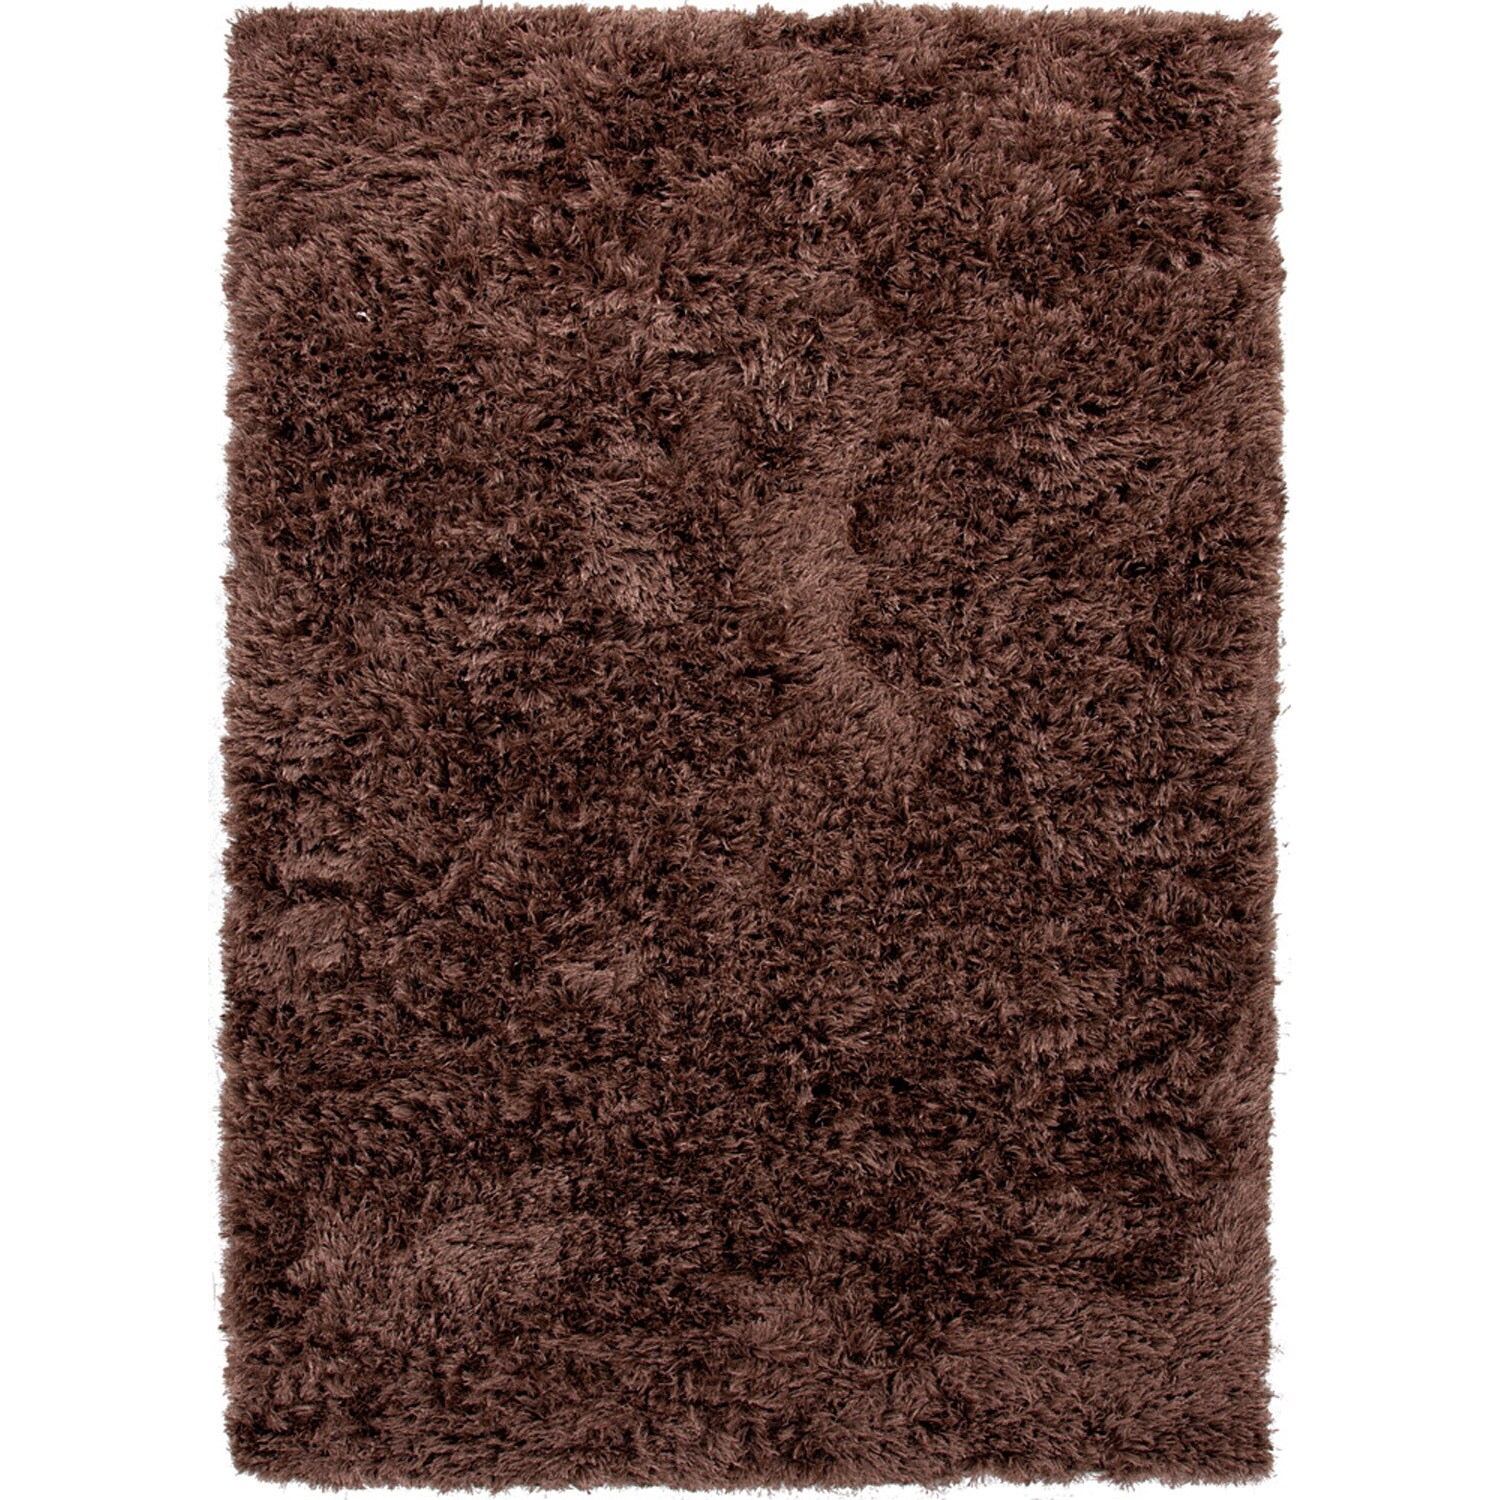 Hand woven Shags Solid Pattern Brown Rug (4 X 6)